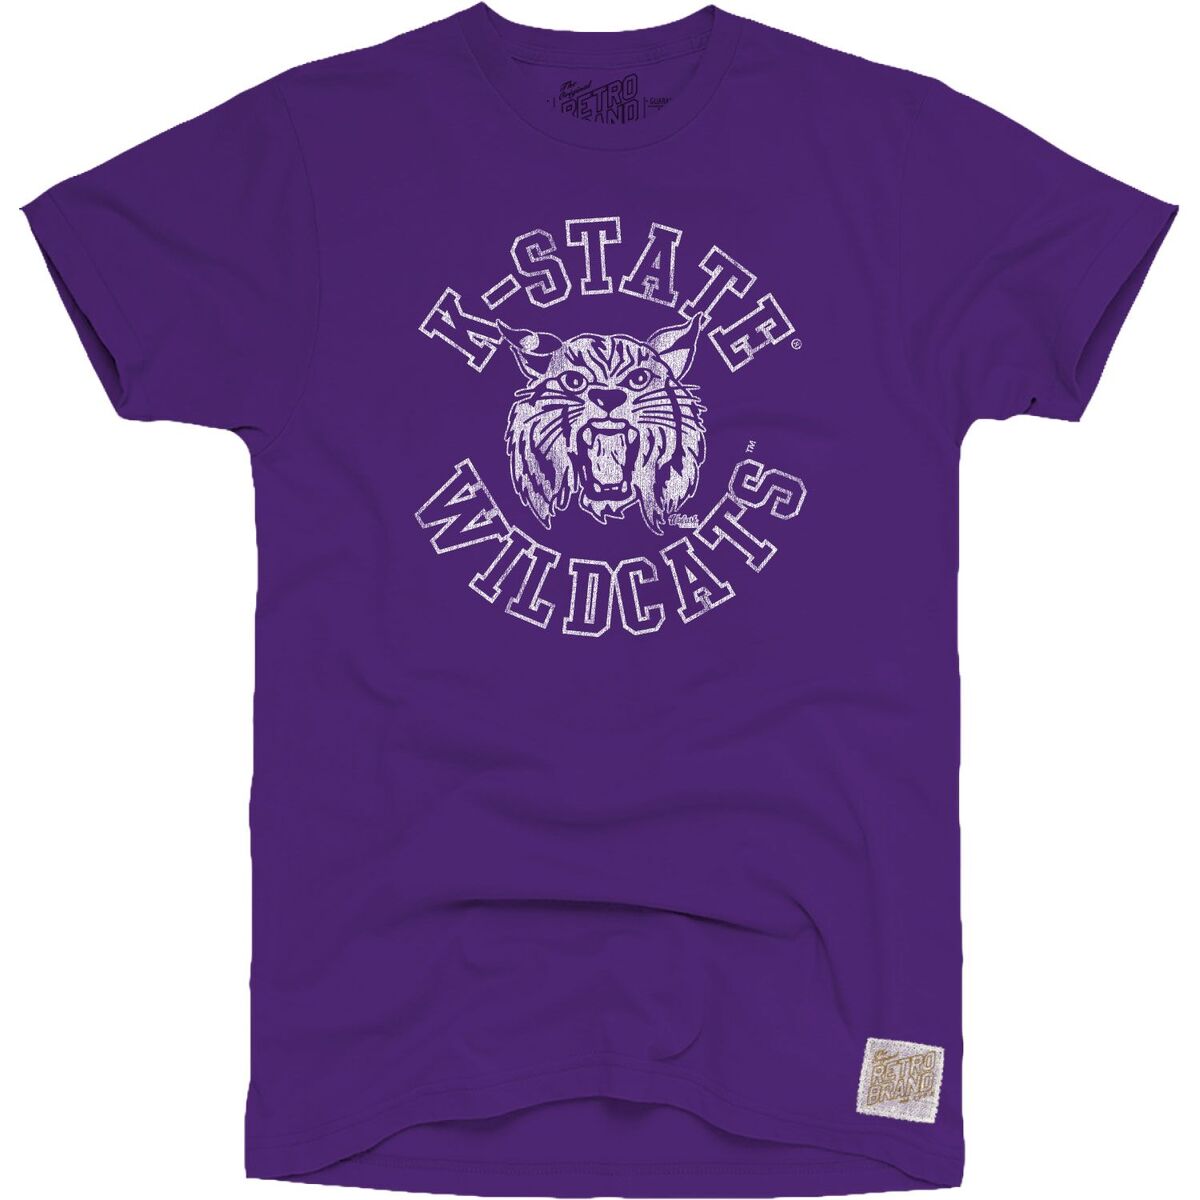 K-State Wildcats with vault logo in white outline on our 100% cotton unisex tee in purple